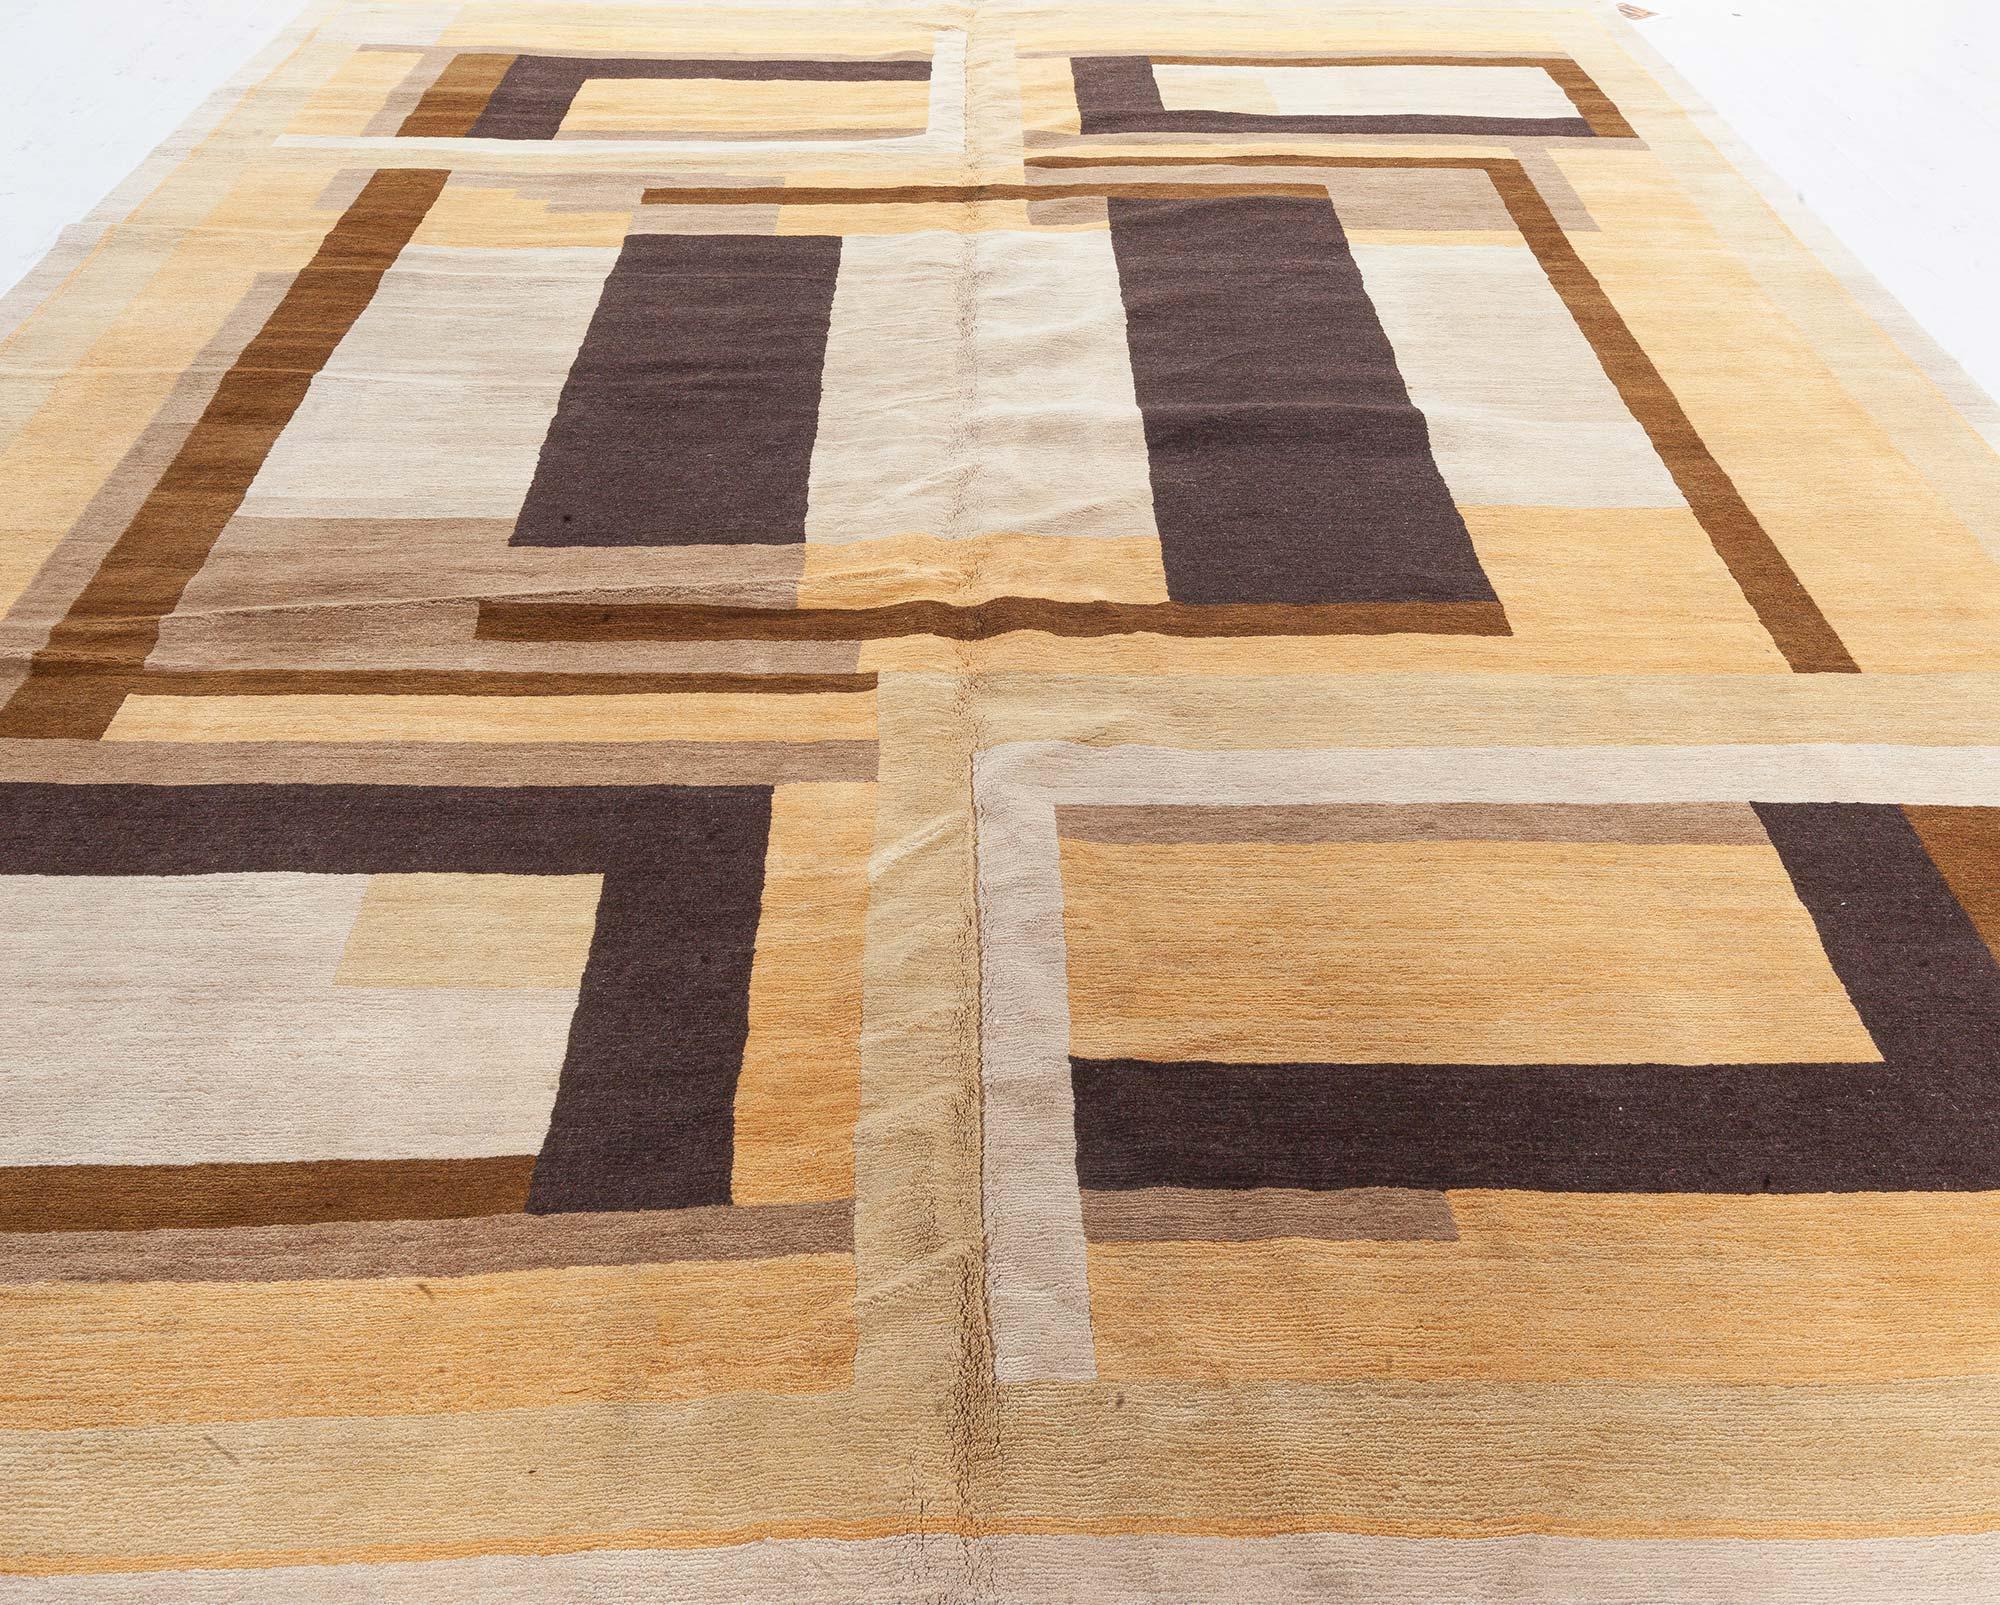 Contemporary Art Deco inspired brown, beige and yellow rug by Doris Leslie Blau.
Size: 9'0